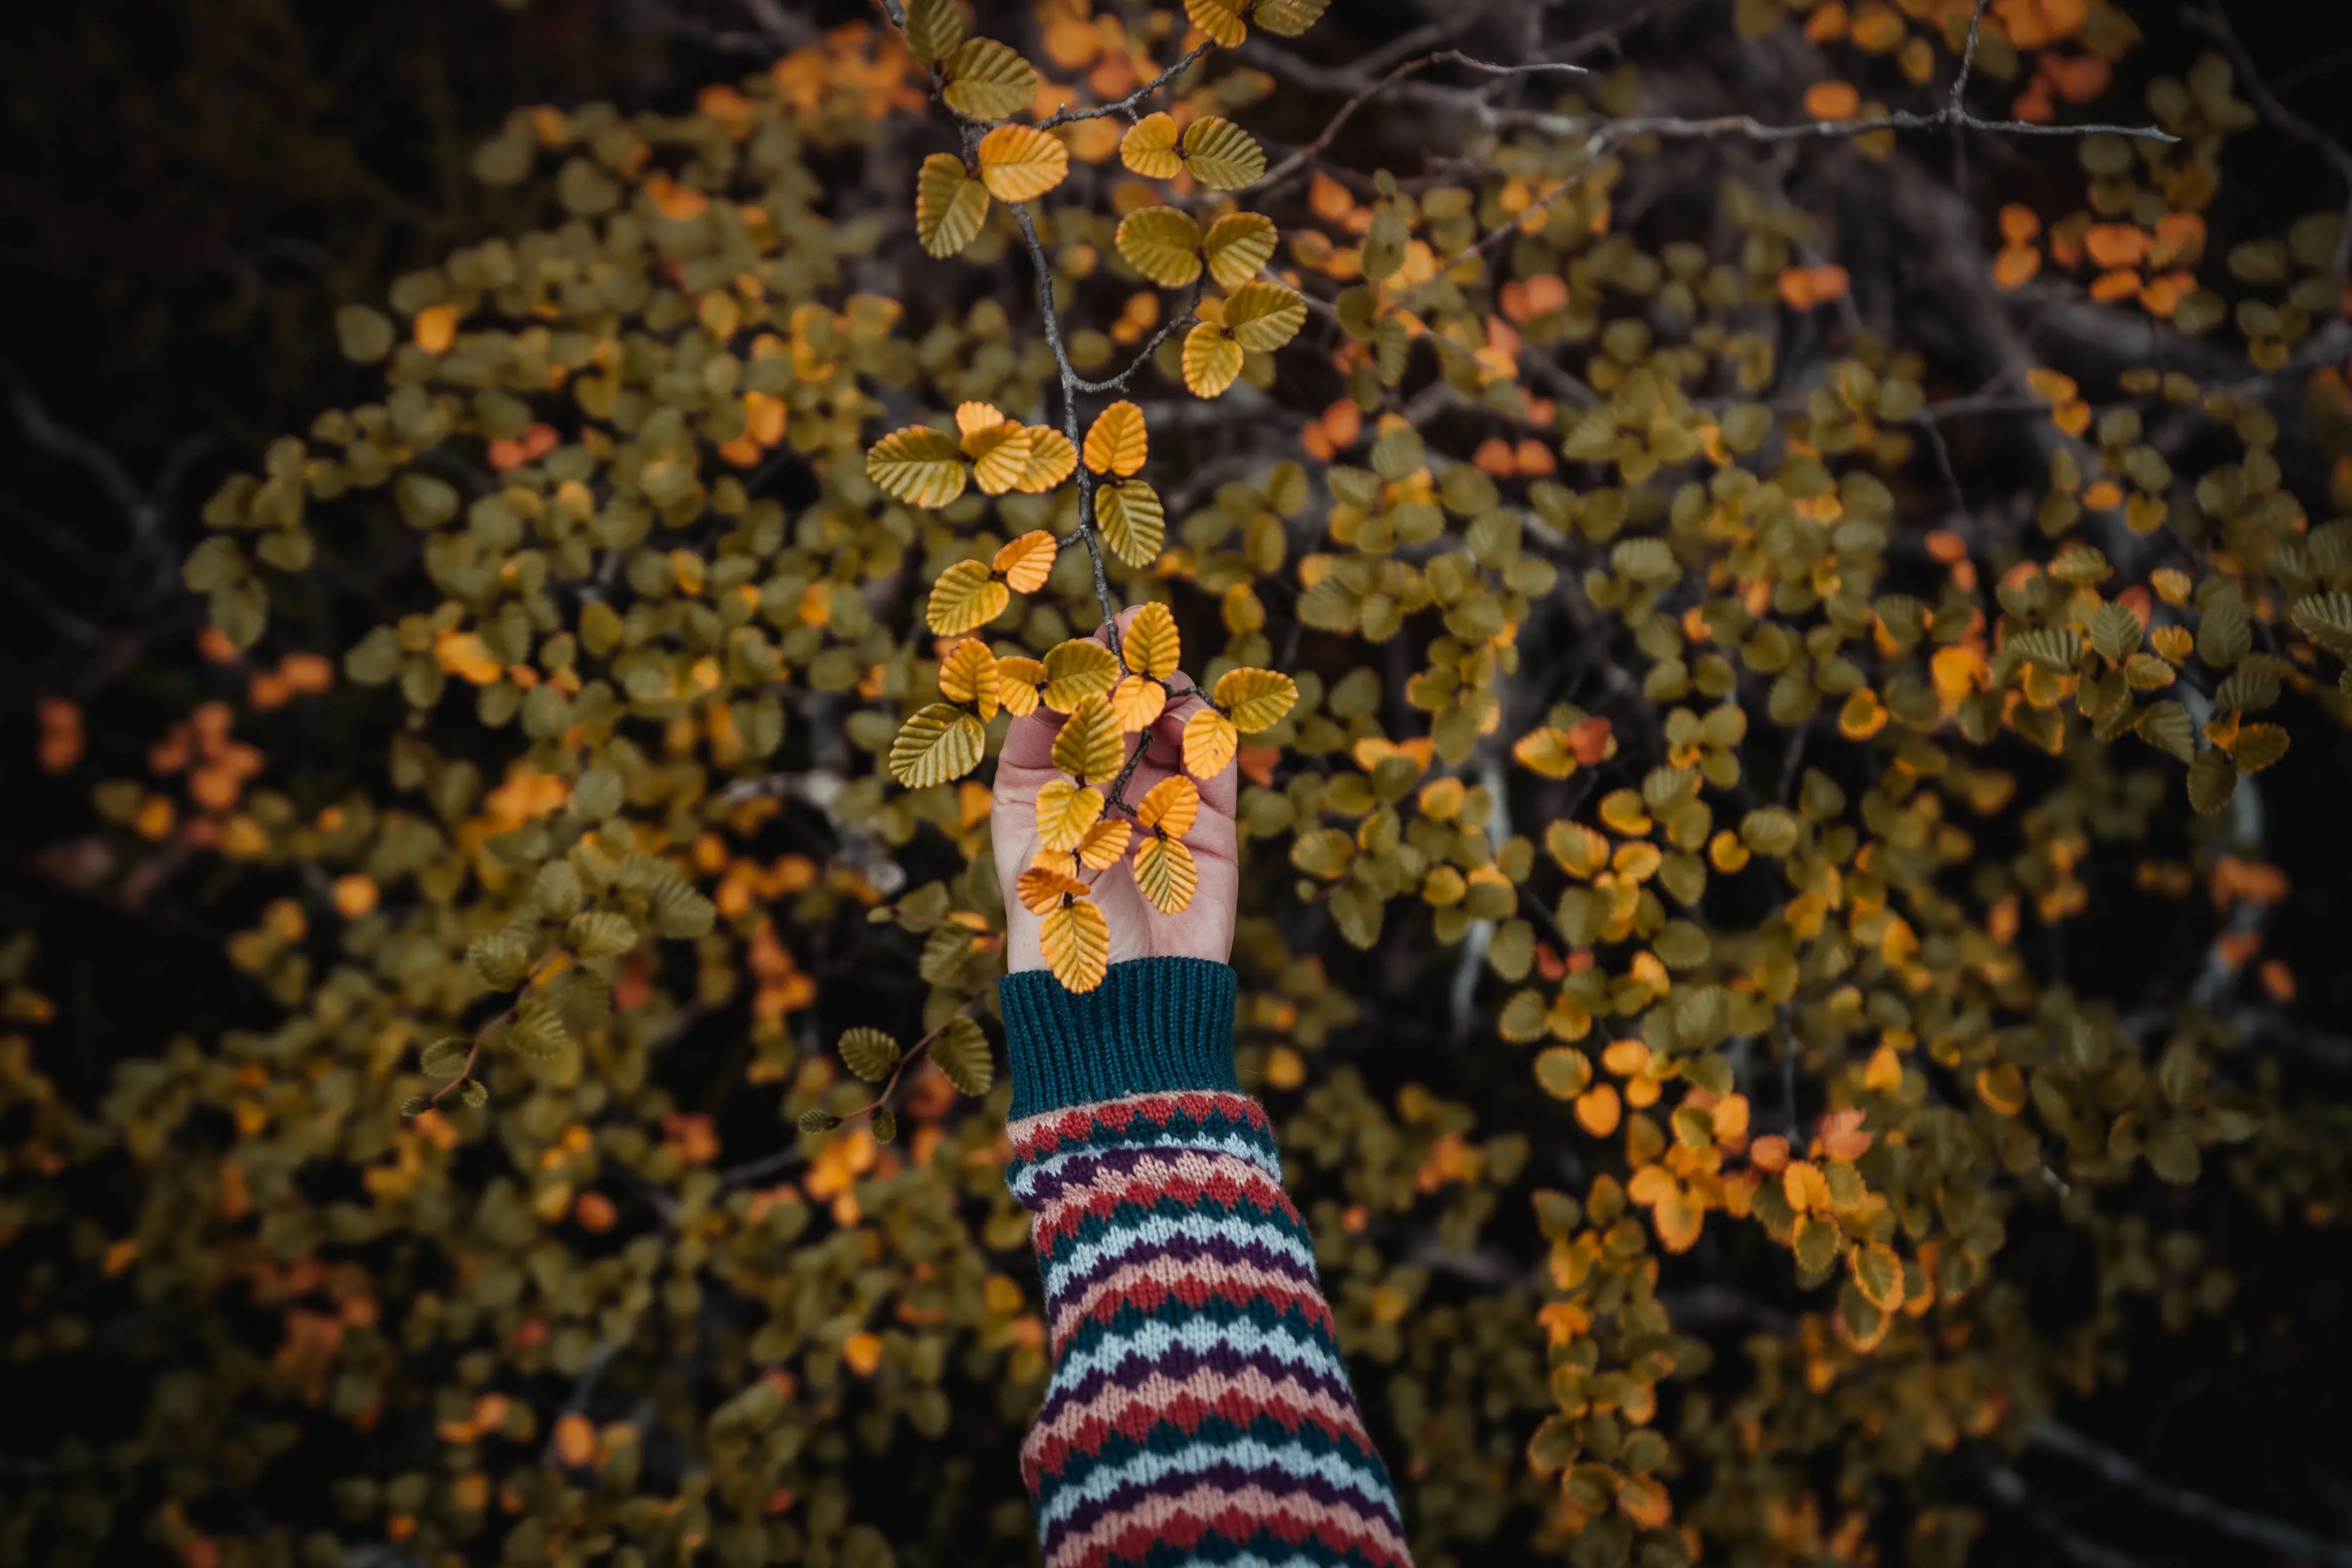 A hand reaches out to grab fagus at Cradle Mountain.